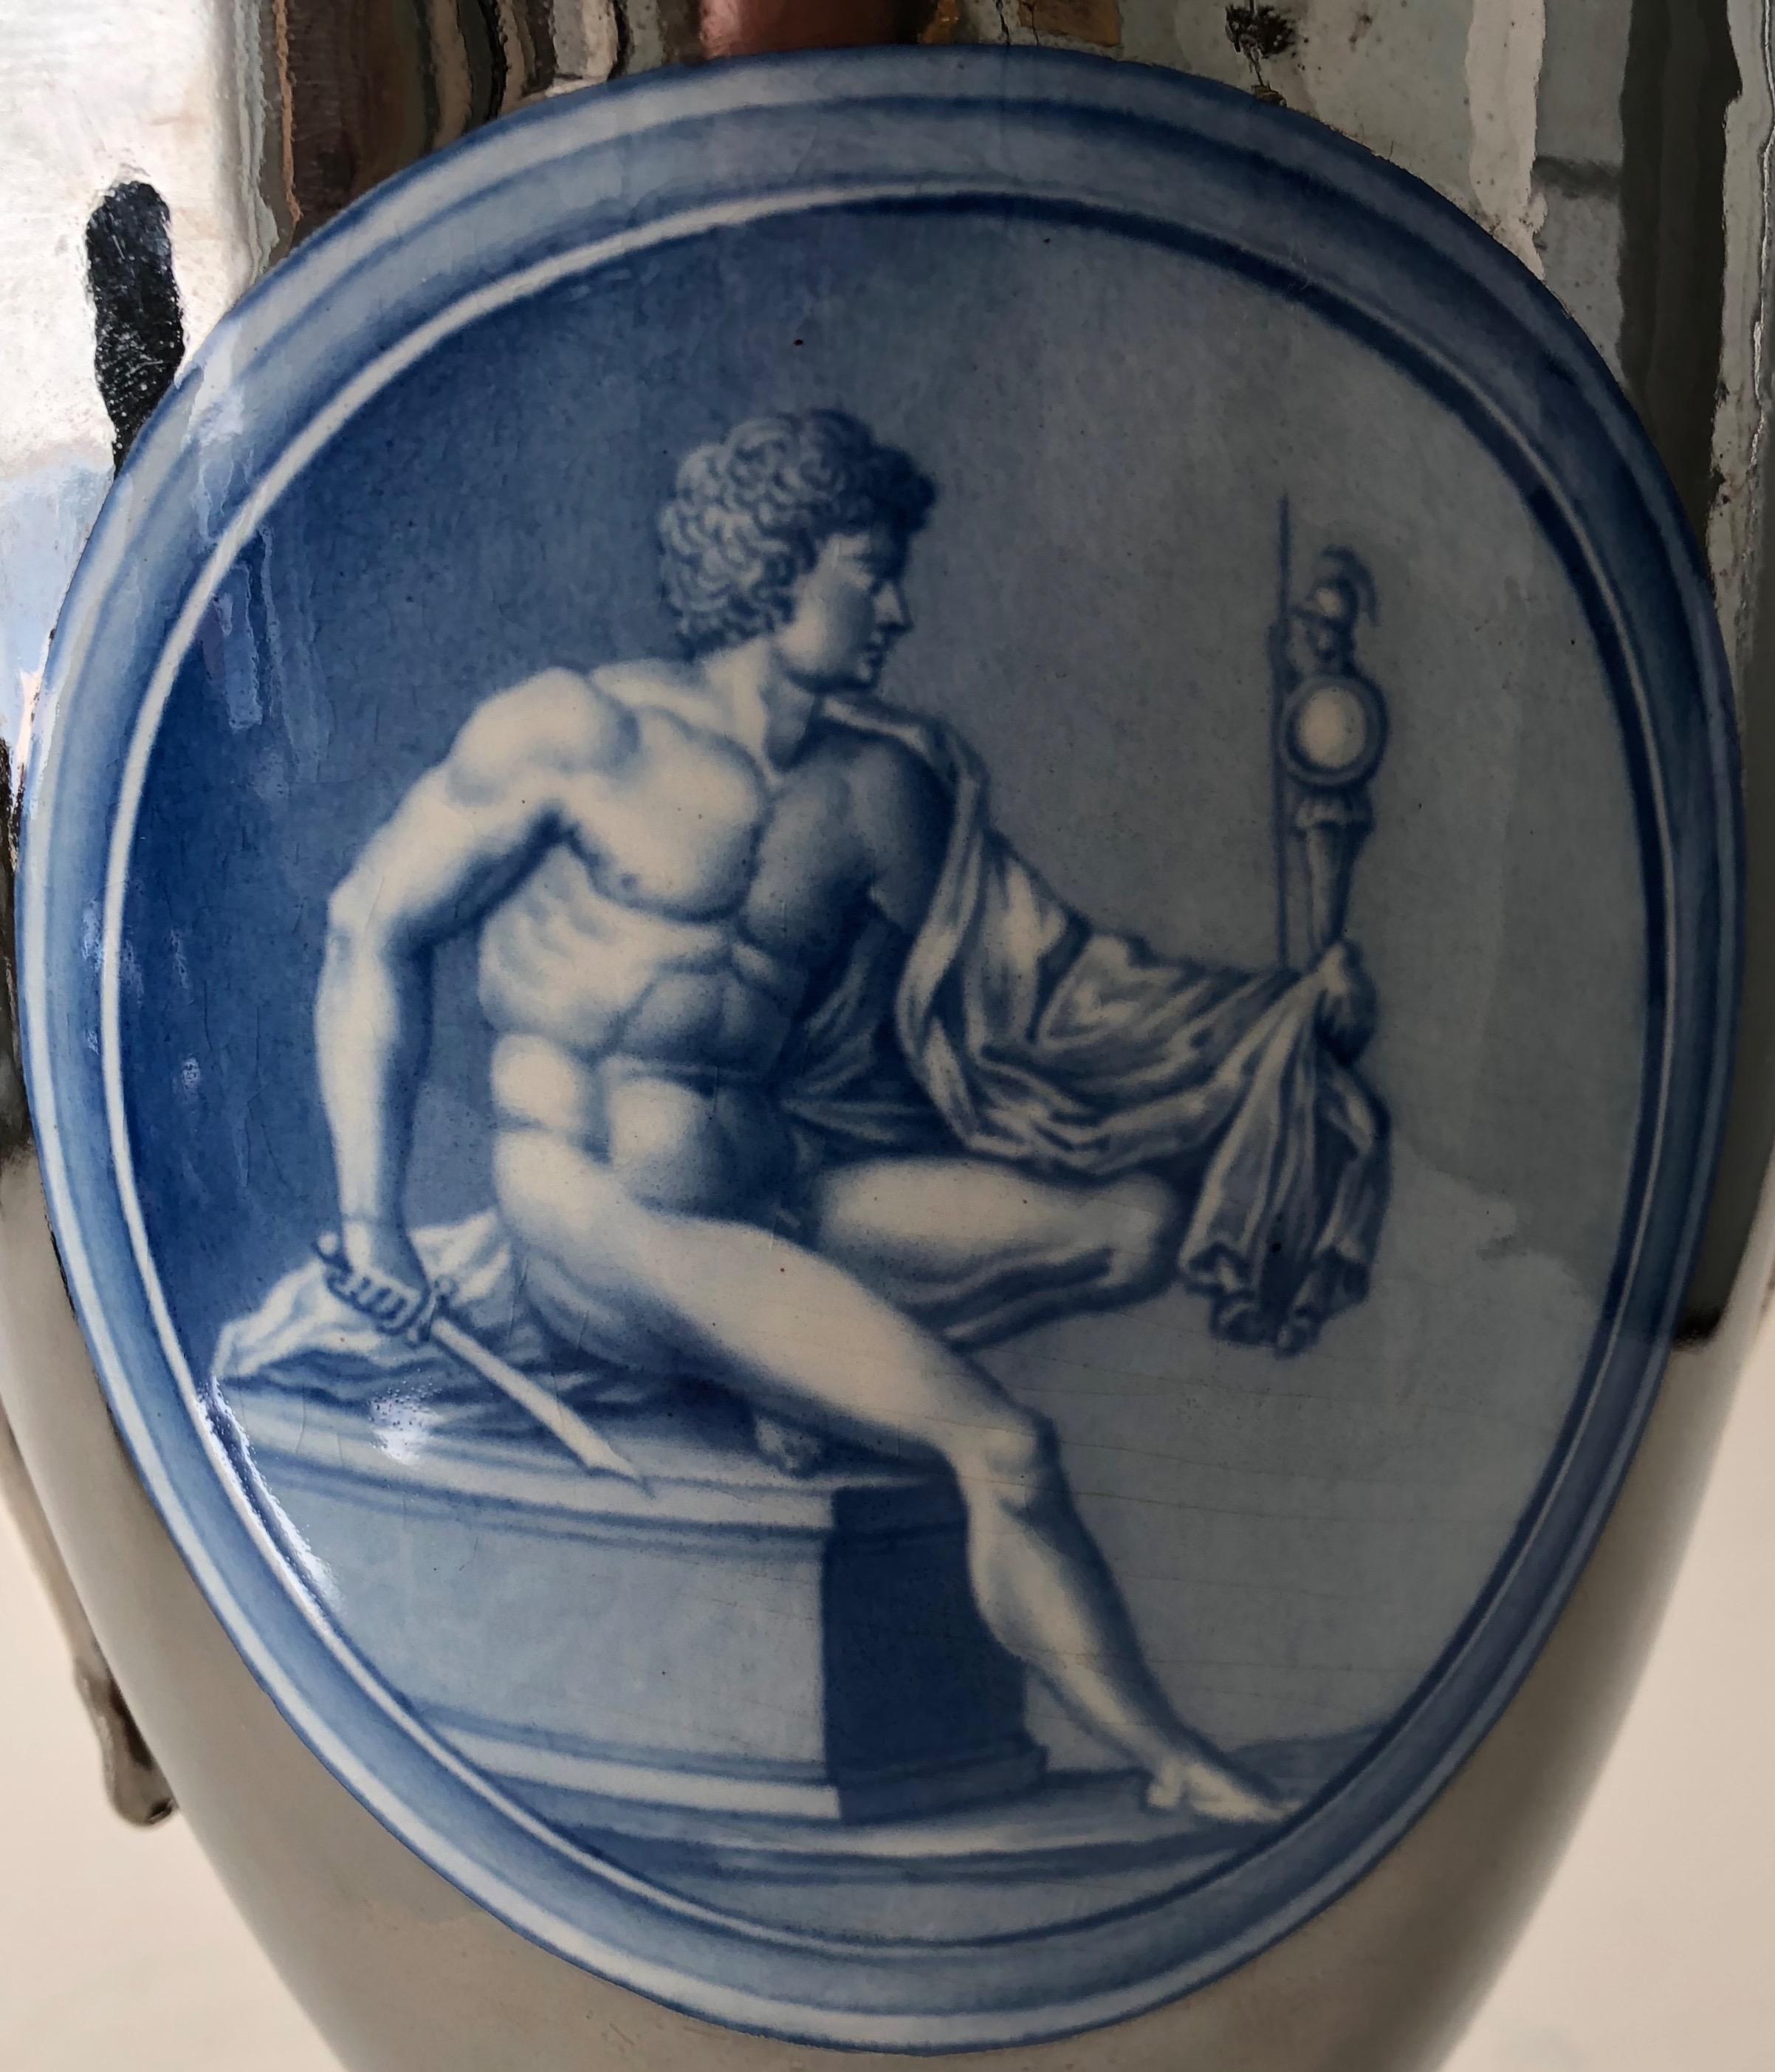 This elegant vase of attenuated proportions was given an unusual silver-luster glaze, and embellished with two medallions on a military theme. One depicts a young soldier with a sword and statuette of Athena, goddess of war. The other an older,